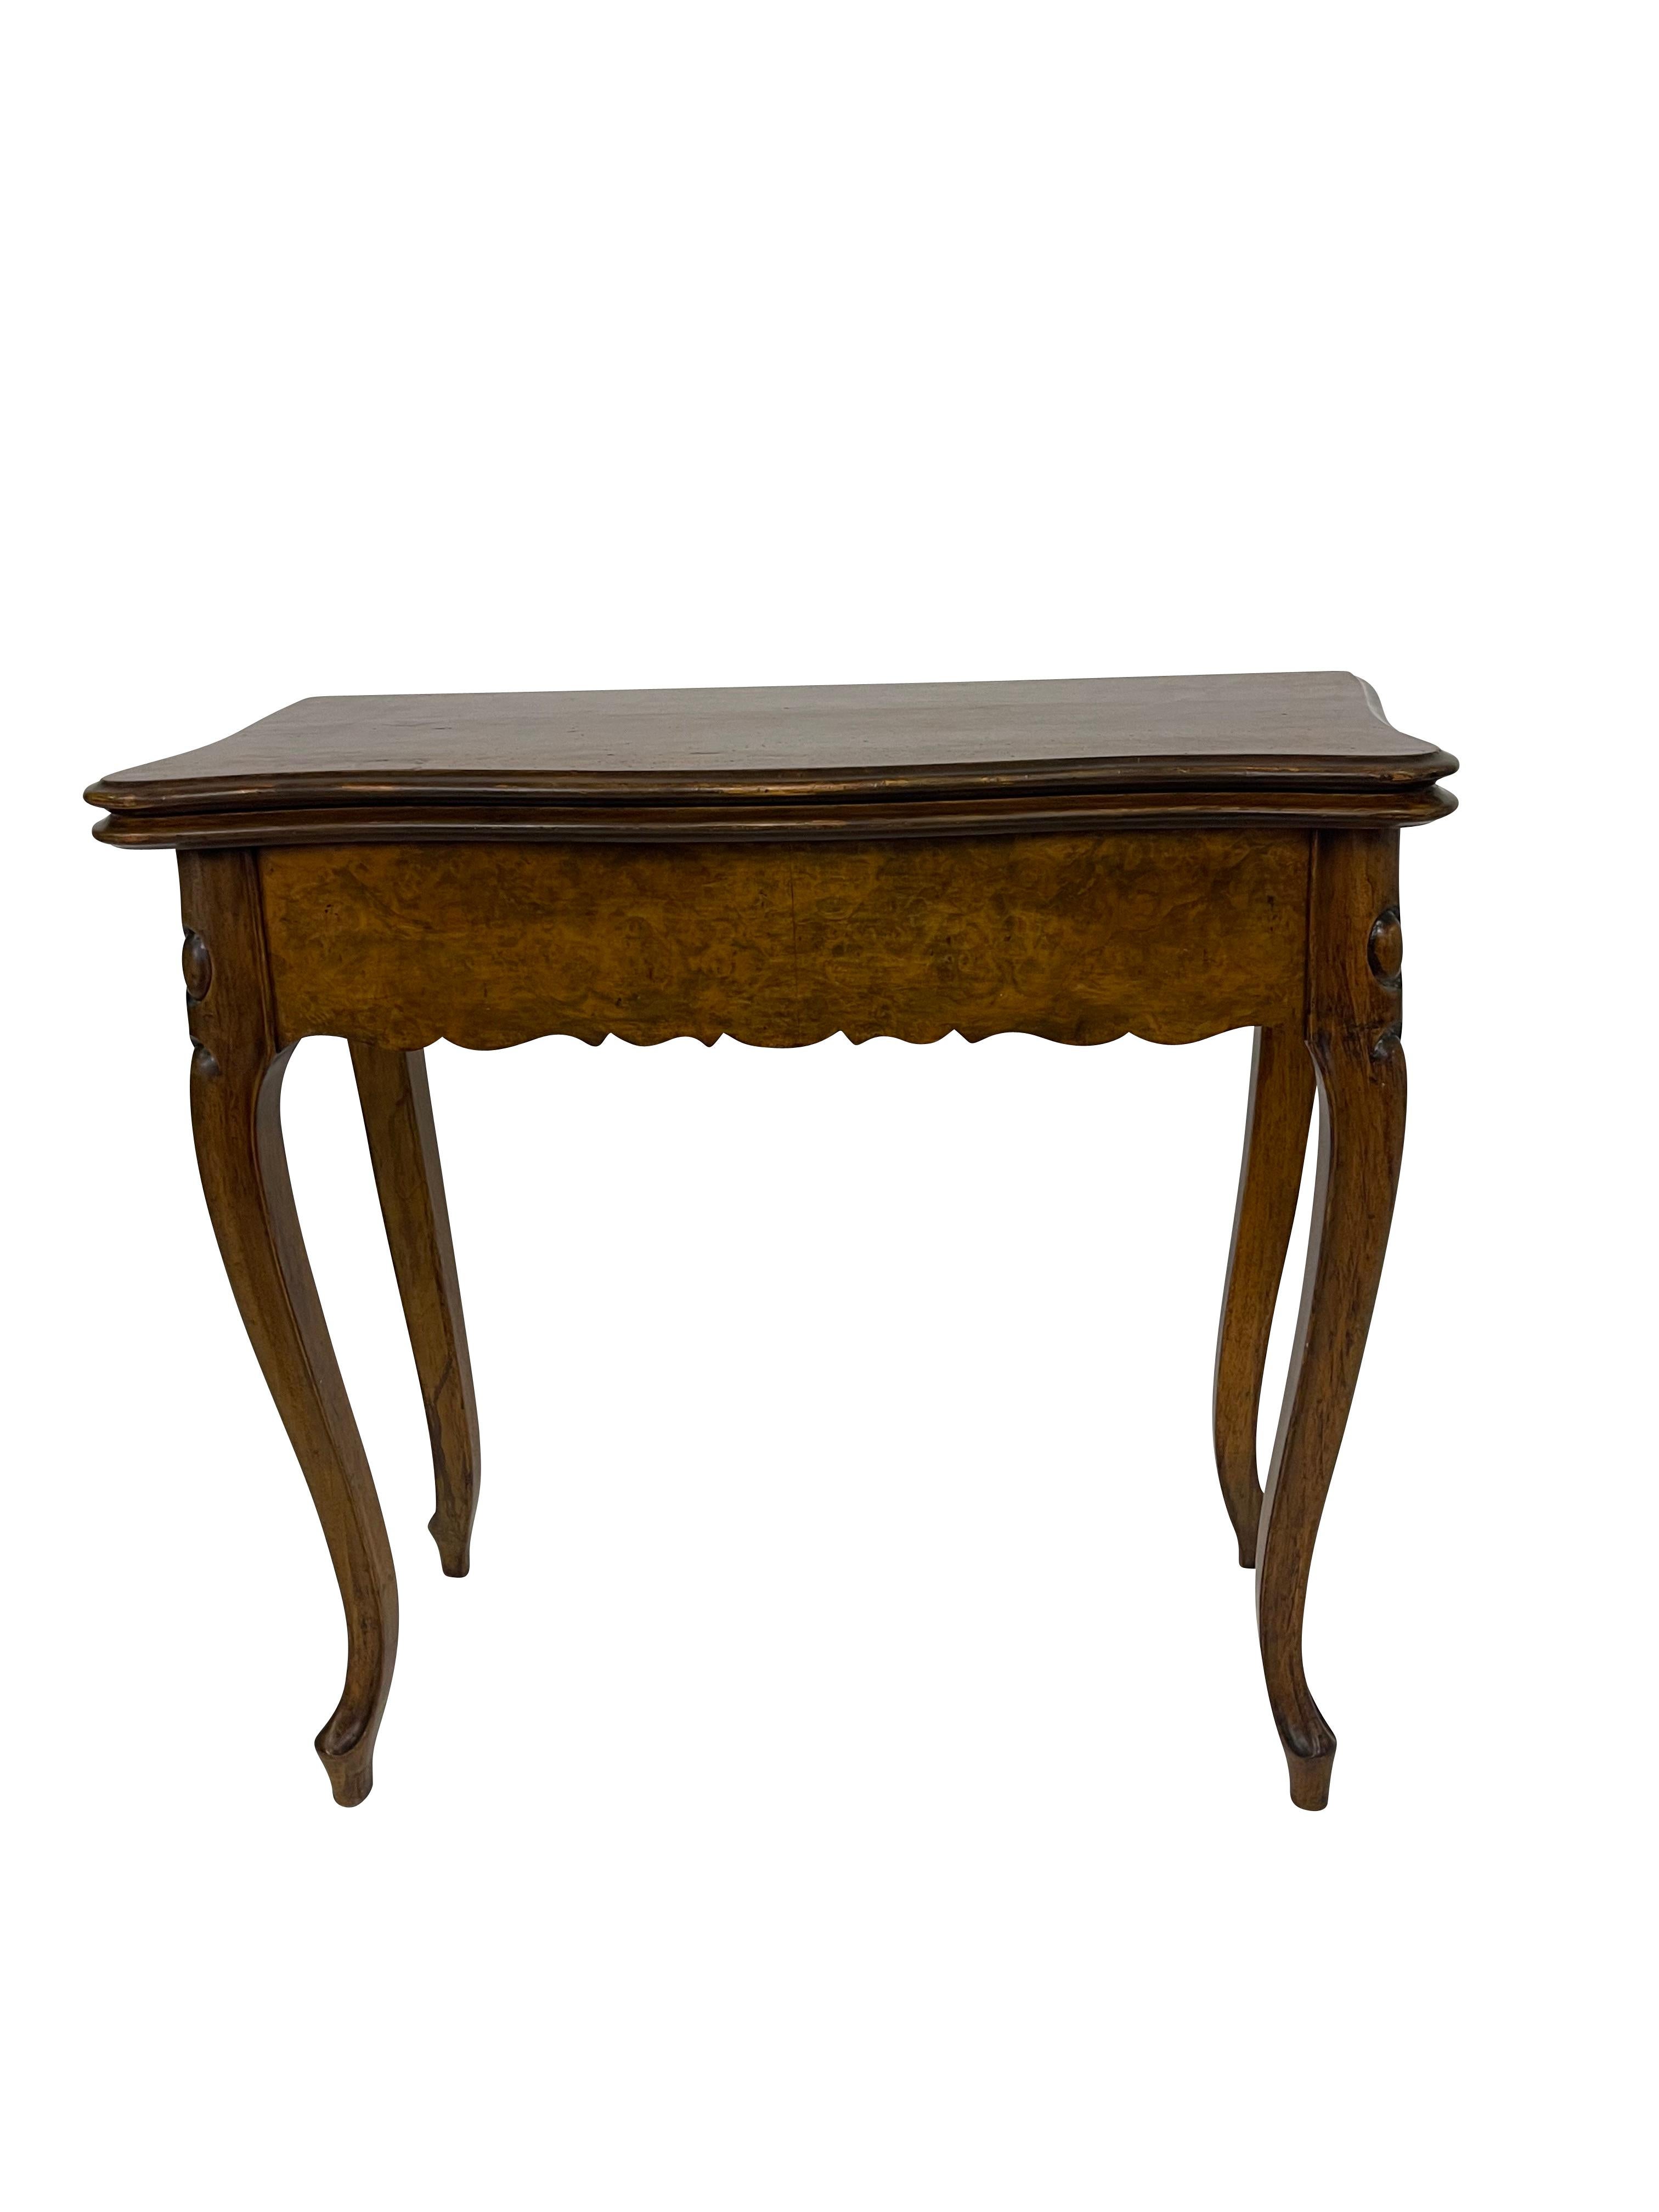 Hand-Carved 19th Century  English Rococo Revival Burl  Walnut Games Table 